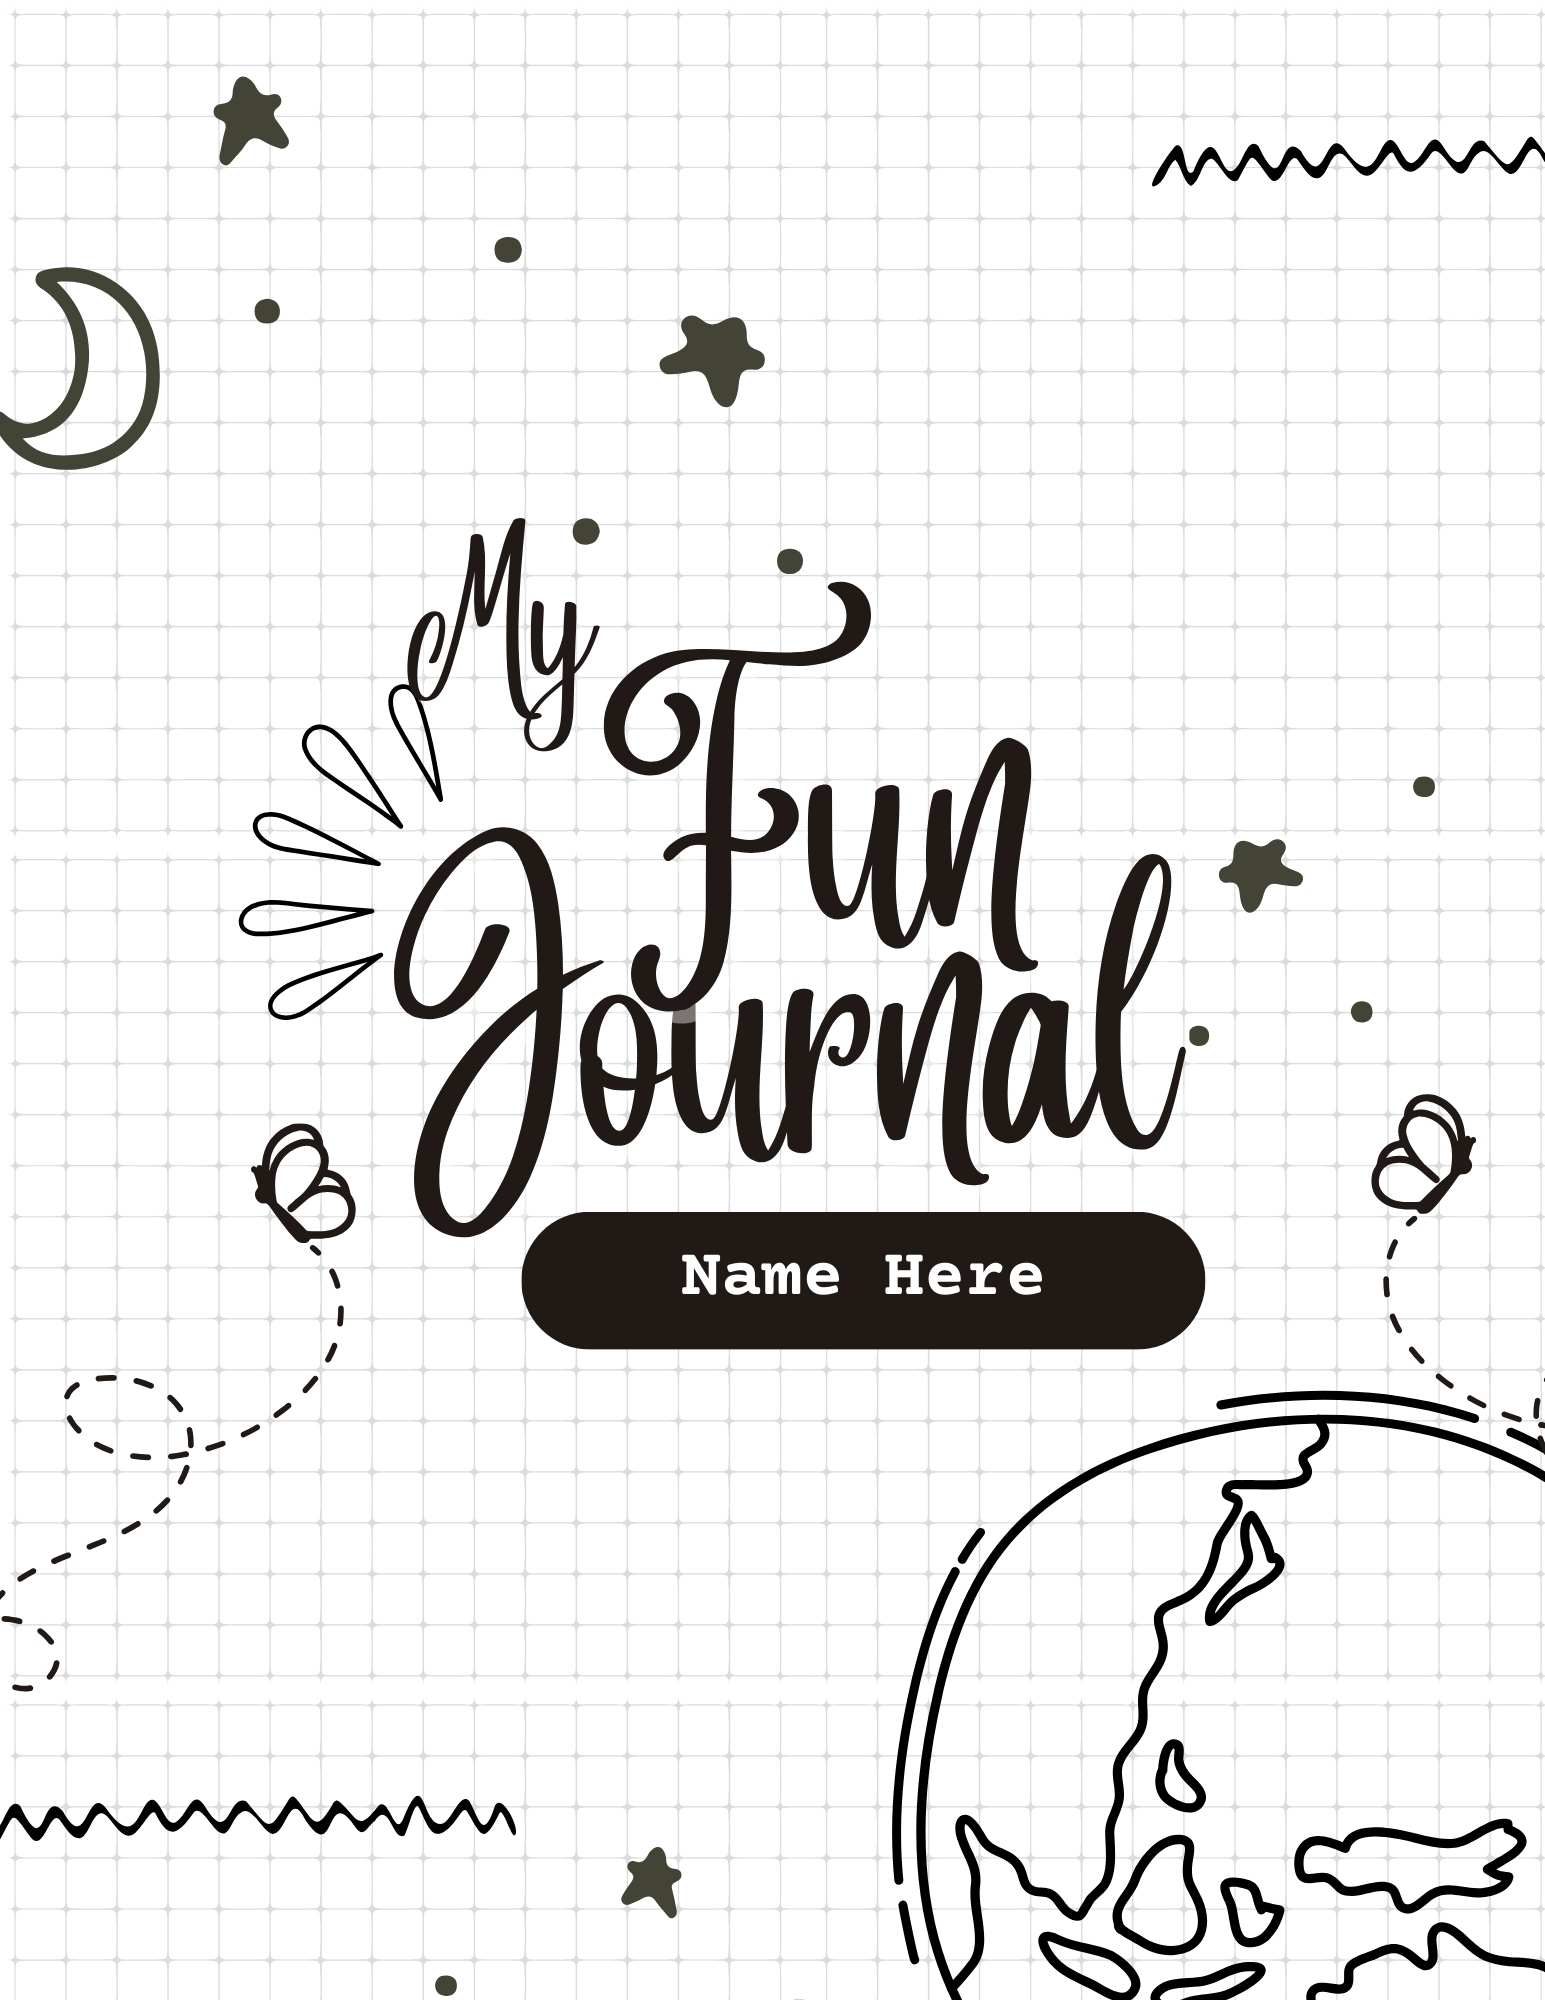 50 of the Best Fun Journaling Prompts